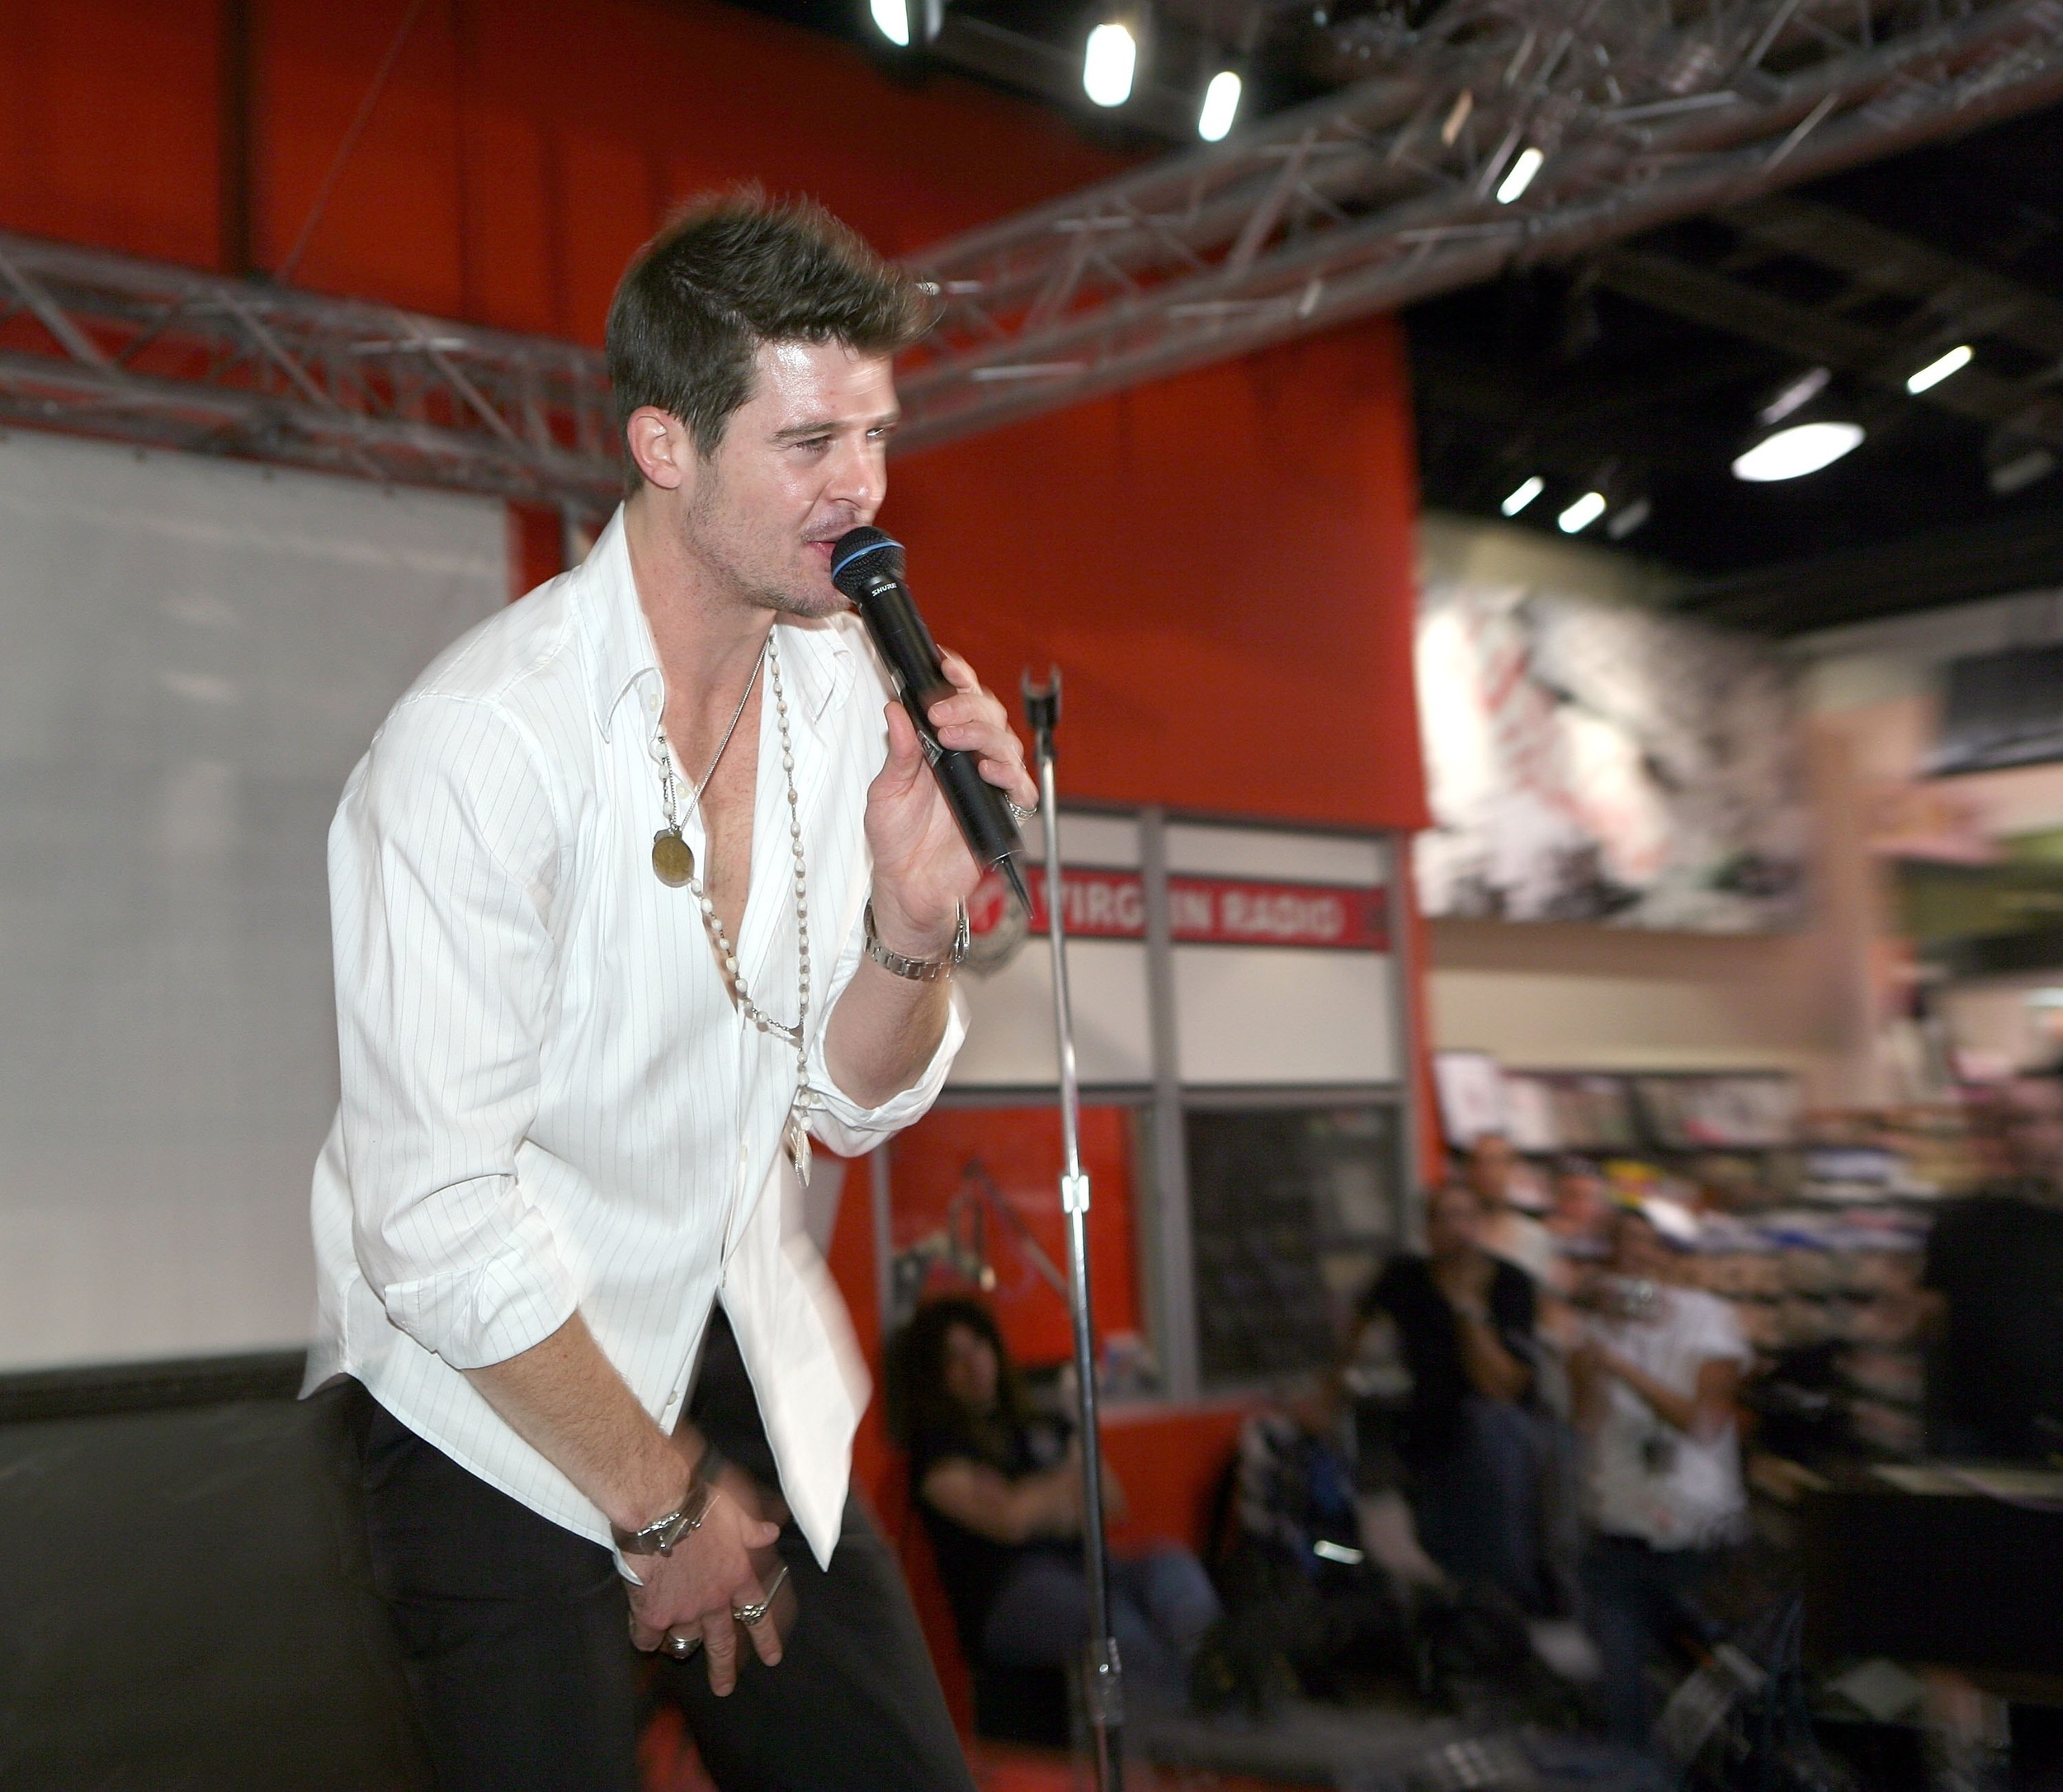 <p>Long before he made his name with "Blurred Lines" or became (sigh) a guest judge on "The Masked Singer," Robin Thicke was aiming to be the sexiest name in blue-eyed soul and R&B. Sometimes his aims to be the most sensual man on radio got a little heavy-handed (his 2009 album was called "Sex Therapy: The Session"), but his sophomore effort, "The Evolution of Robin Thicke," hit a soul-pop sweet spot. Written and co-produced by Thicke himself, there's an earnestness to this album that never felt overworked: He was a laid-back, easy-going loverman who wanted to make an album perfect for a midday makeout session. "Lost Without U" had a sly acoustic touch, "Everything I Can't Have" cleverly used its sample of "Malambo No. 1" by Yma Sumac to funky effect, and the Pharrell production, "Wanna Love U Girl," had a mid-tempo pulse that helped break Thicke through on the radio. From here, Thicke went on to have highs ("Blurred Lines" topping the charts), lows (the controversy surrounding "Blurred Lines" actual lyrics, to say nothing of the <a href="https://www.rollingstone.com/music/music-news/robin-thicke-pharrell-williams-blurred-lines-copyright-suit-final-5-million-dollar-judgment-768508/" rel="noopener noreferrer">songwriting lawsuit</a> it got wrapped up in), and even lower lows (making an entire album to try and get his wife back after she left him).</p><p>You may also like: <a href='https://www.yardbarker.com/entertainment/articles/one_and_done_20_great_films_we_never_want_to_watch_again_012224/s1__38983183'>One and done: 20 great films we never want to watch again</a></p>